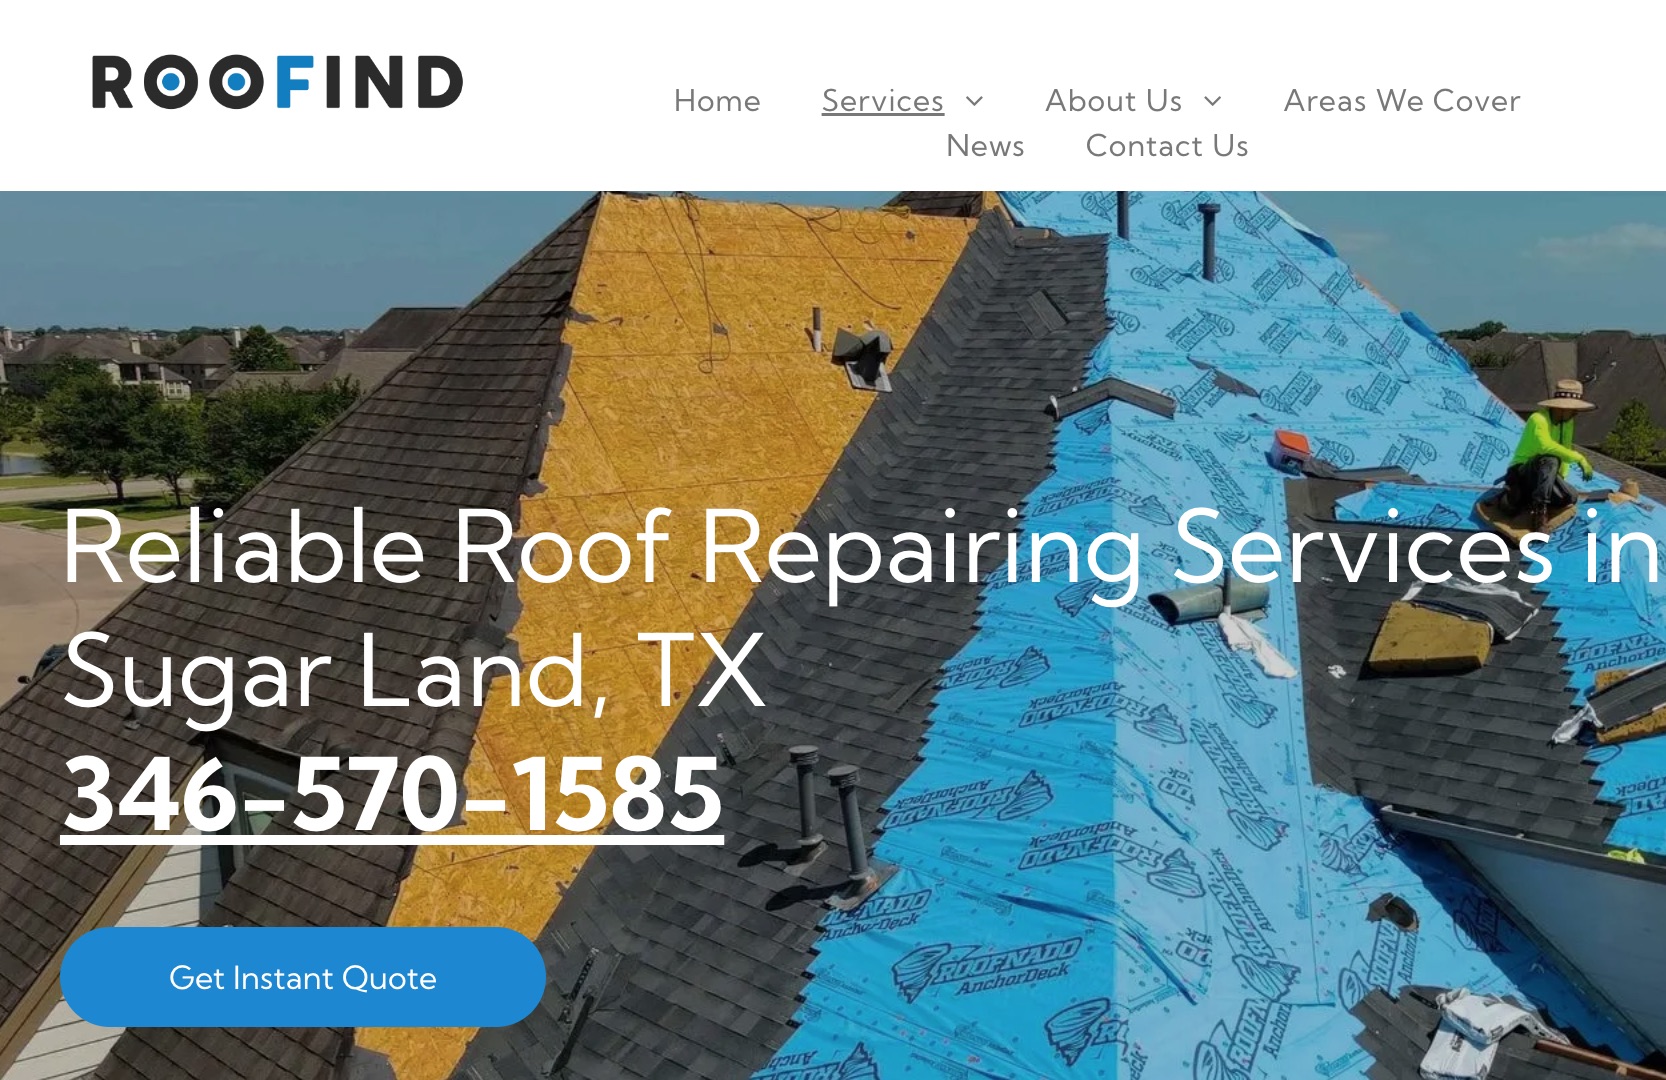 Roofind: Houston’s Premier Roofing and Siding Solution